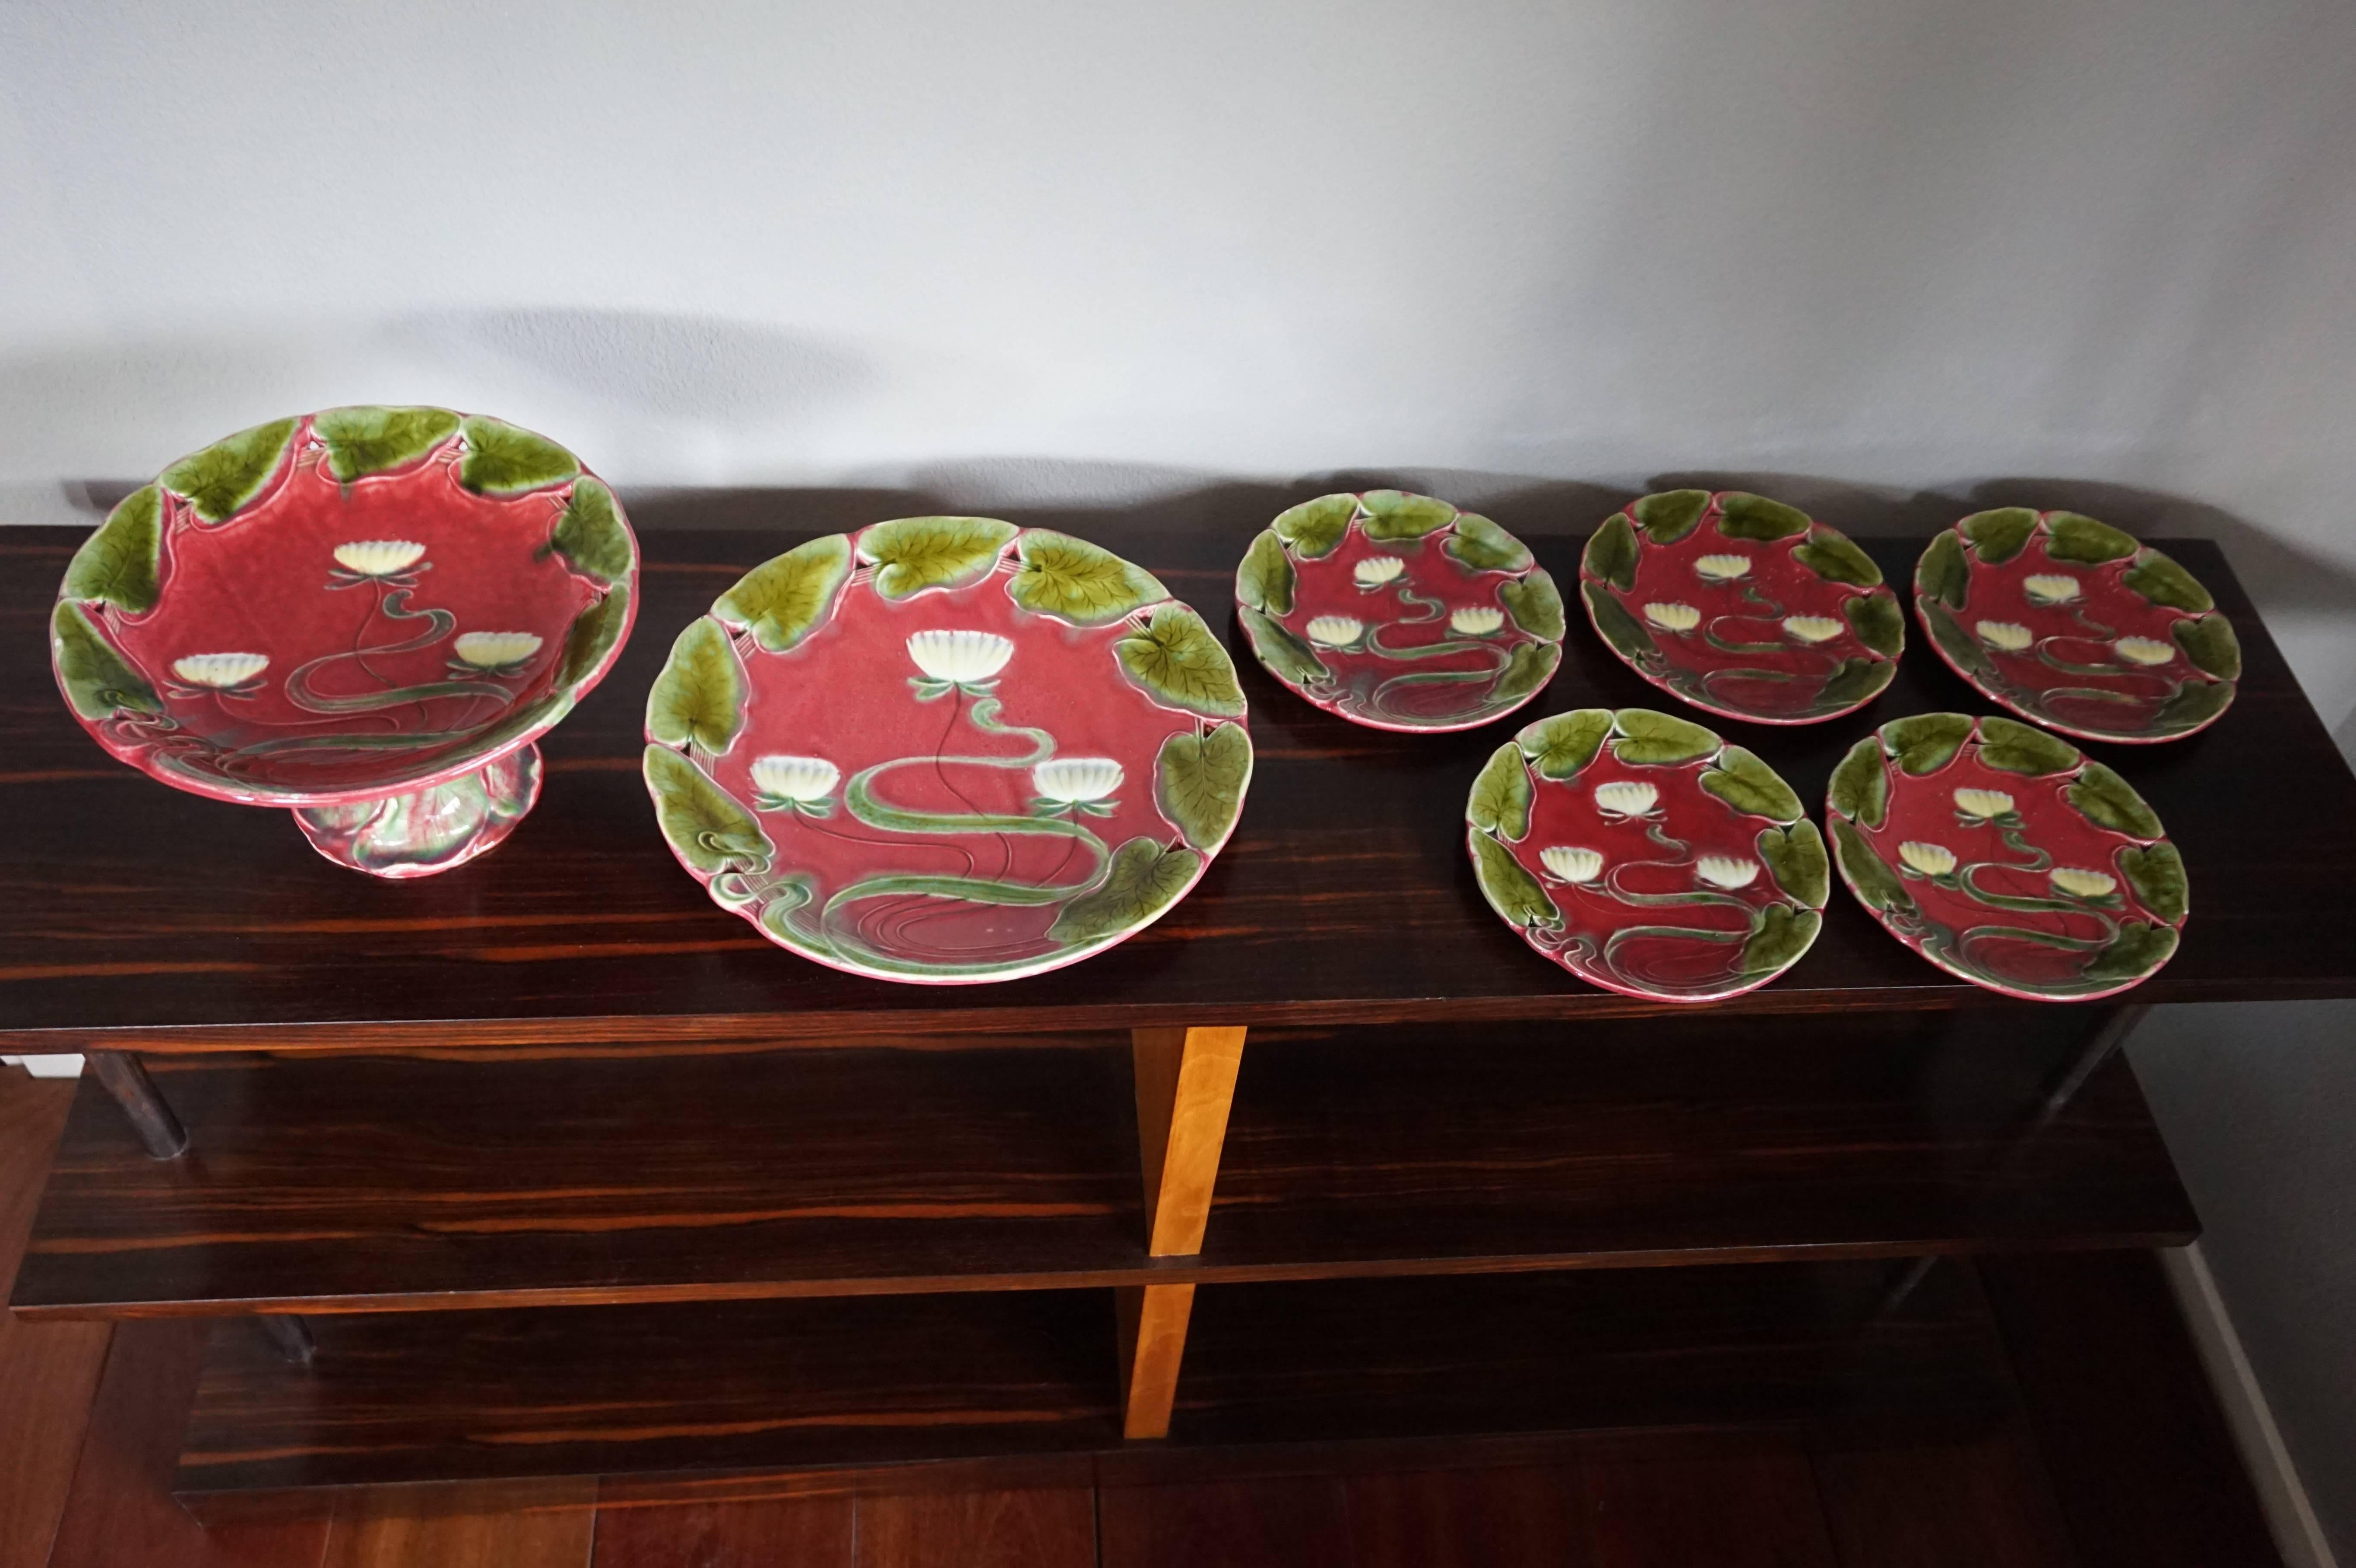 Rare and impressive Art Nouveau tableware for serving cake and fruit.

We cannot think of a better way to present a cake or a pie than on this stunning Art Nouveau tableware. These artistically designed and beautifully colored and glazed plates are